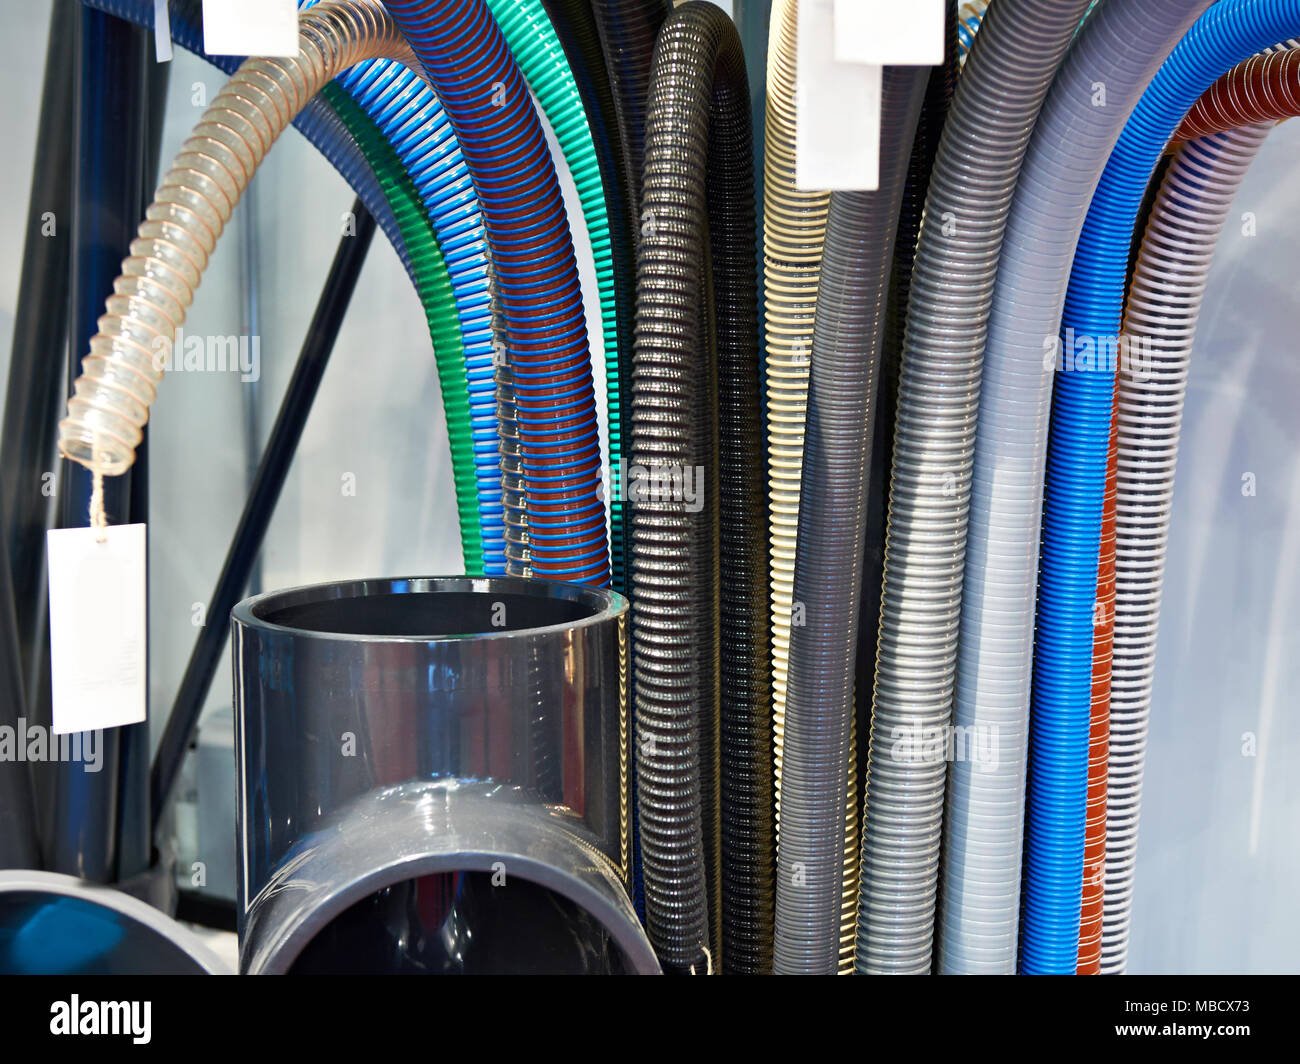 Corrugated plastic hoses for plumbing system Stock Photo